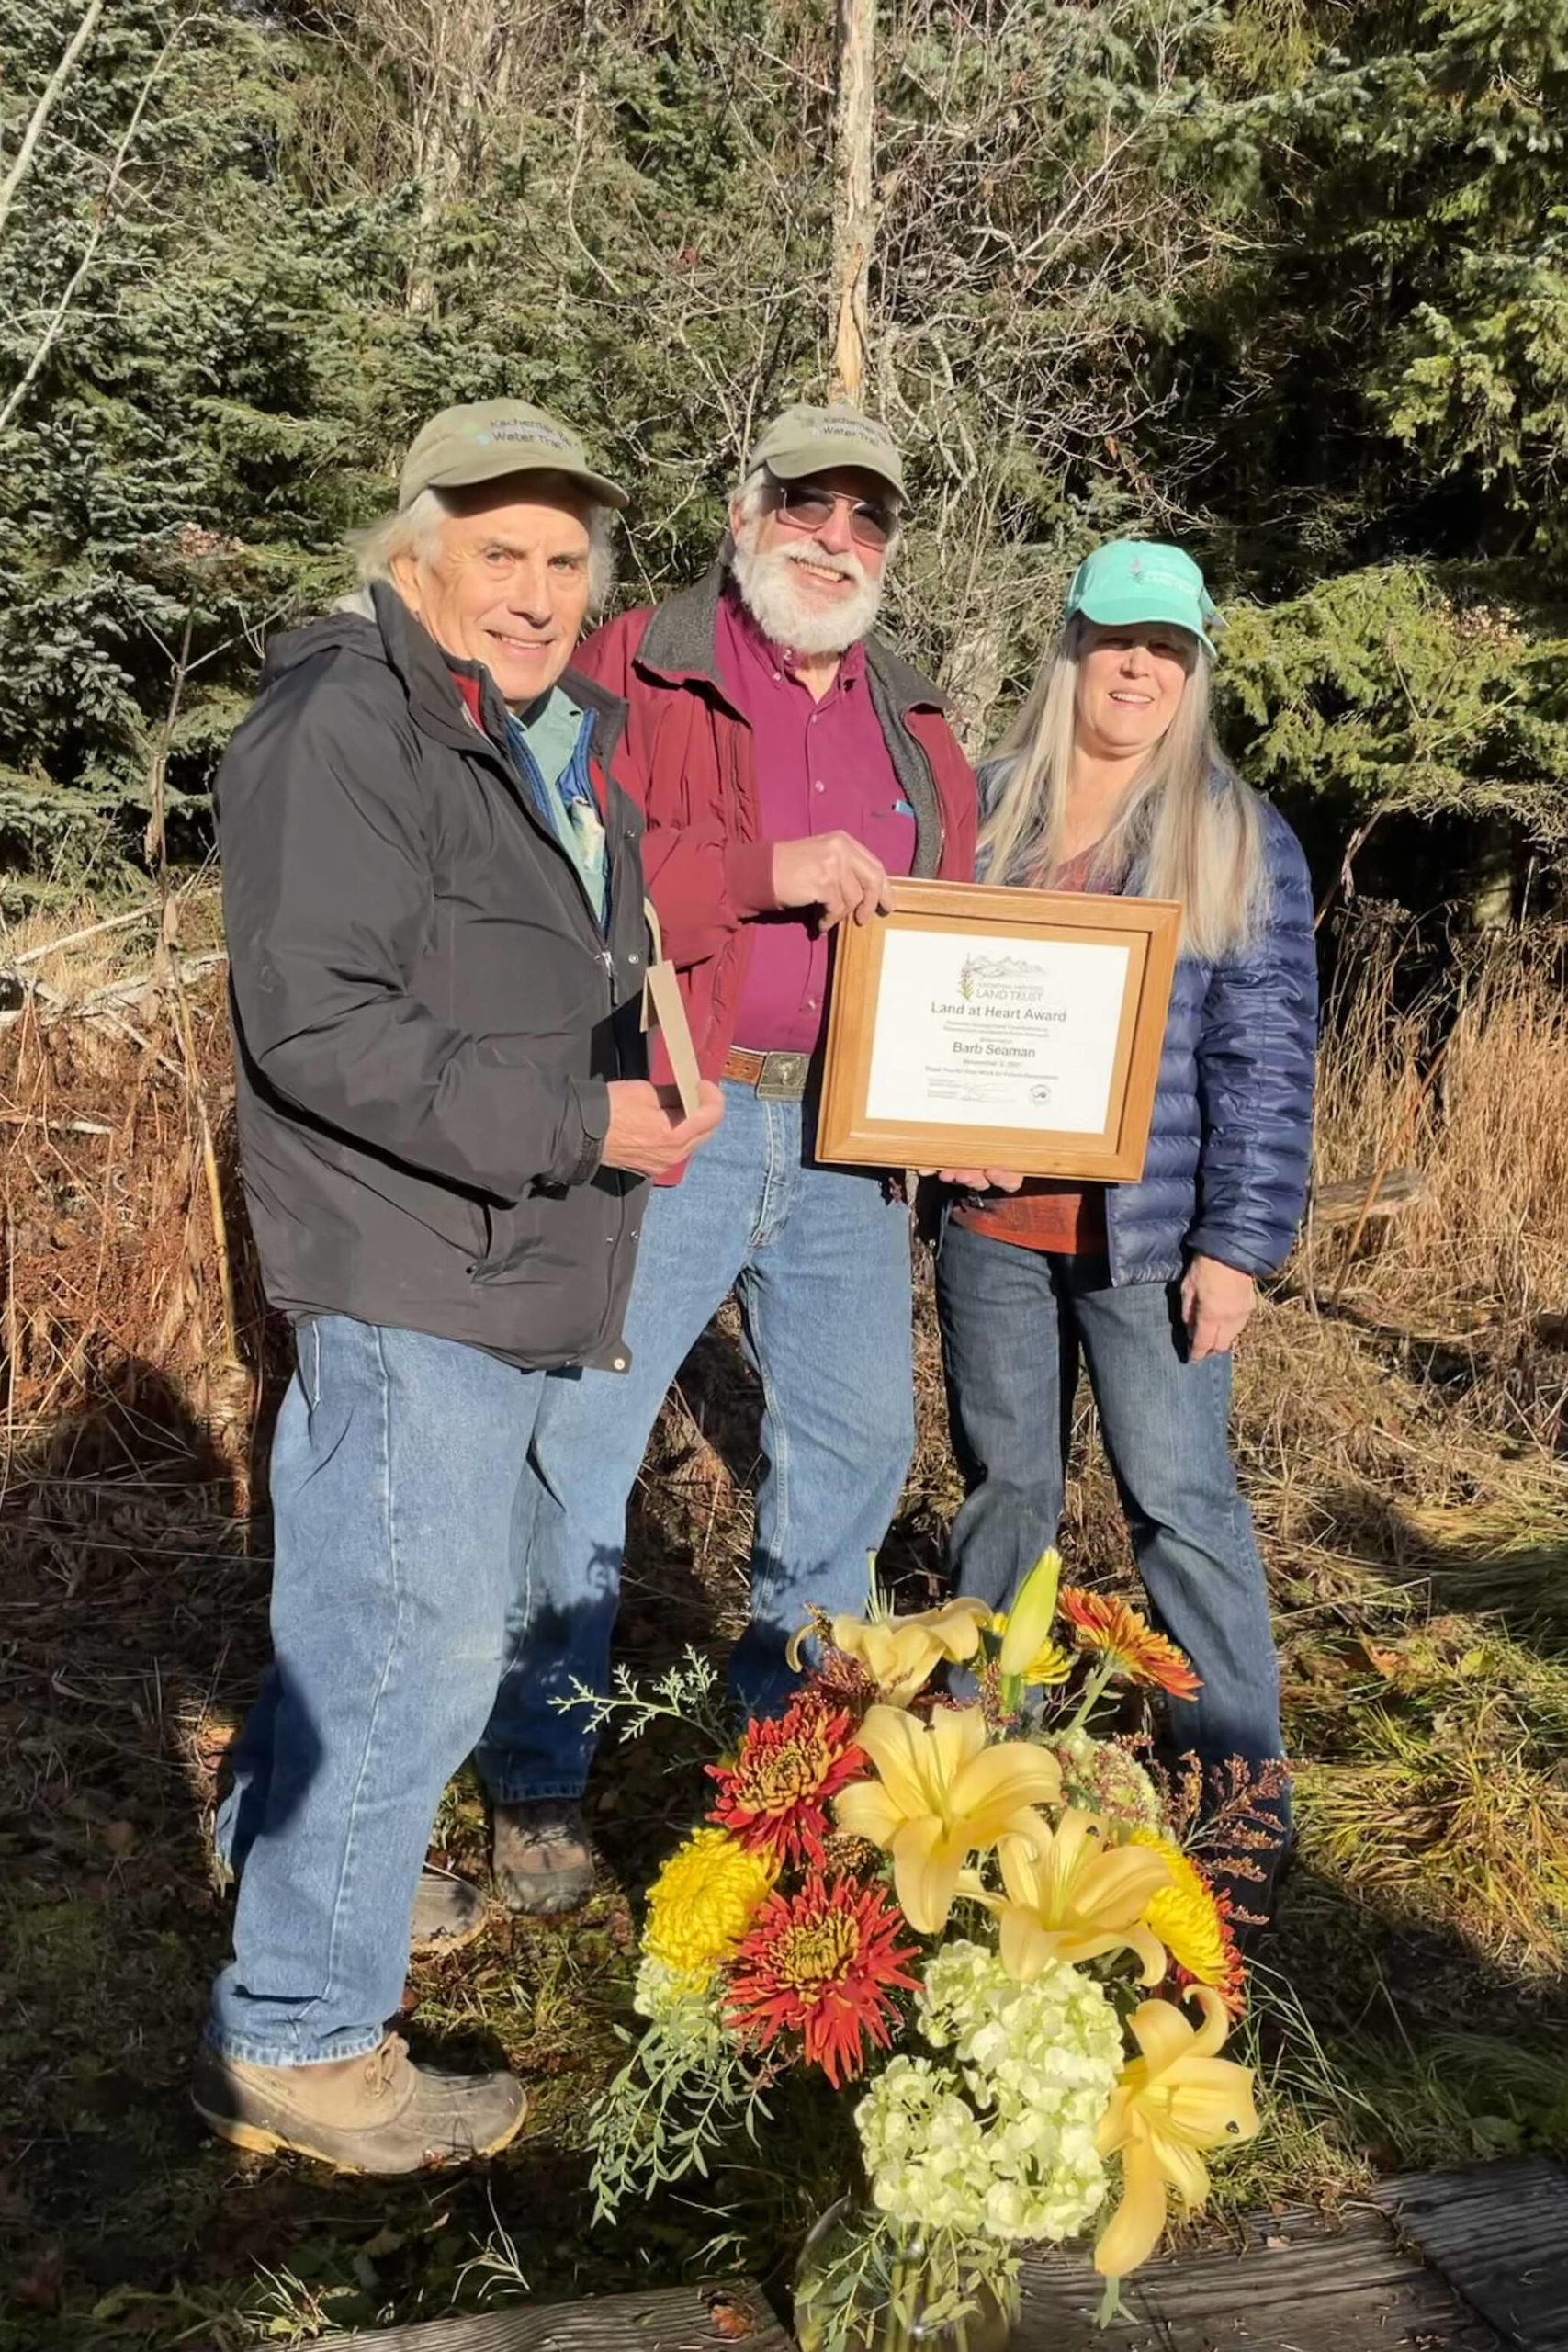 Dave Brann, left, and Robert Archibald, center, present Barb Seaman, right, with the Kachemak Heritage Land Trust Land at Heart Award on Nov. 9 at the Calvin Coyle Trail in Homer. (Photo provided by Kachemak Heritage Land Trust)